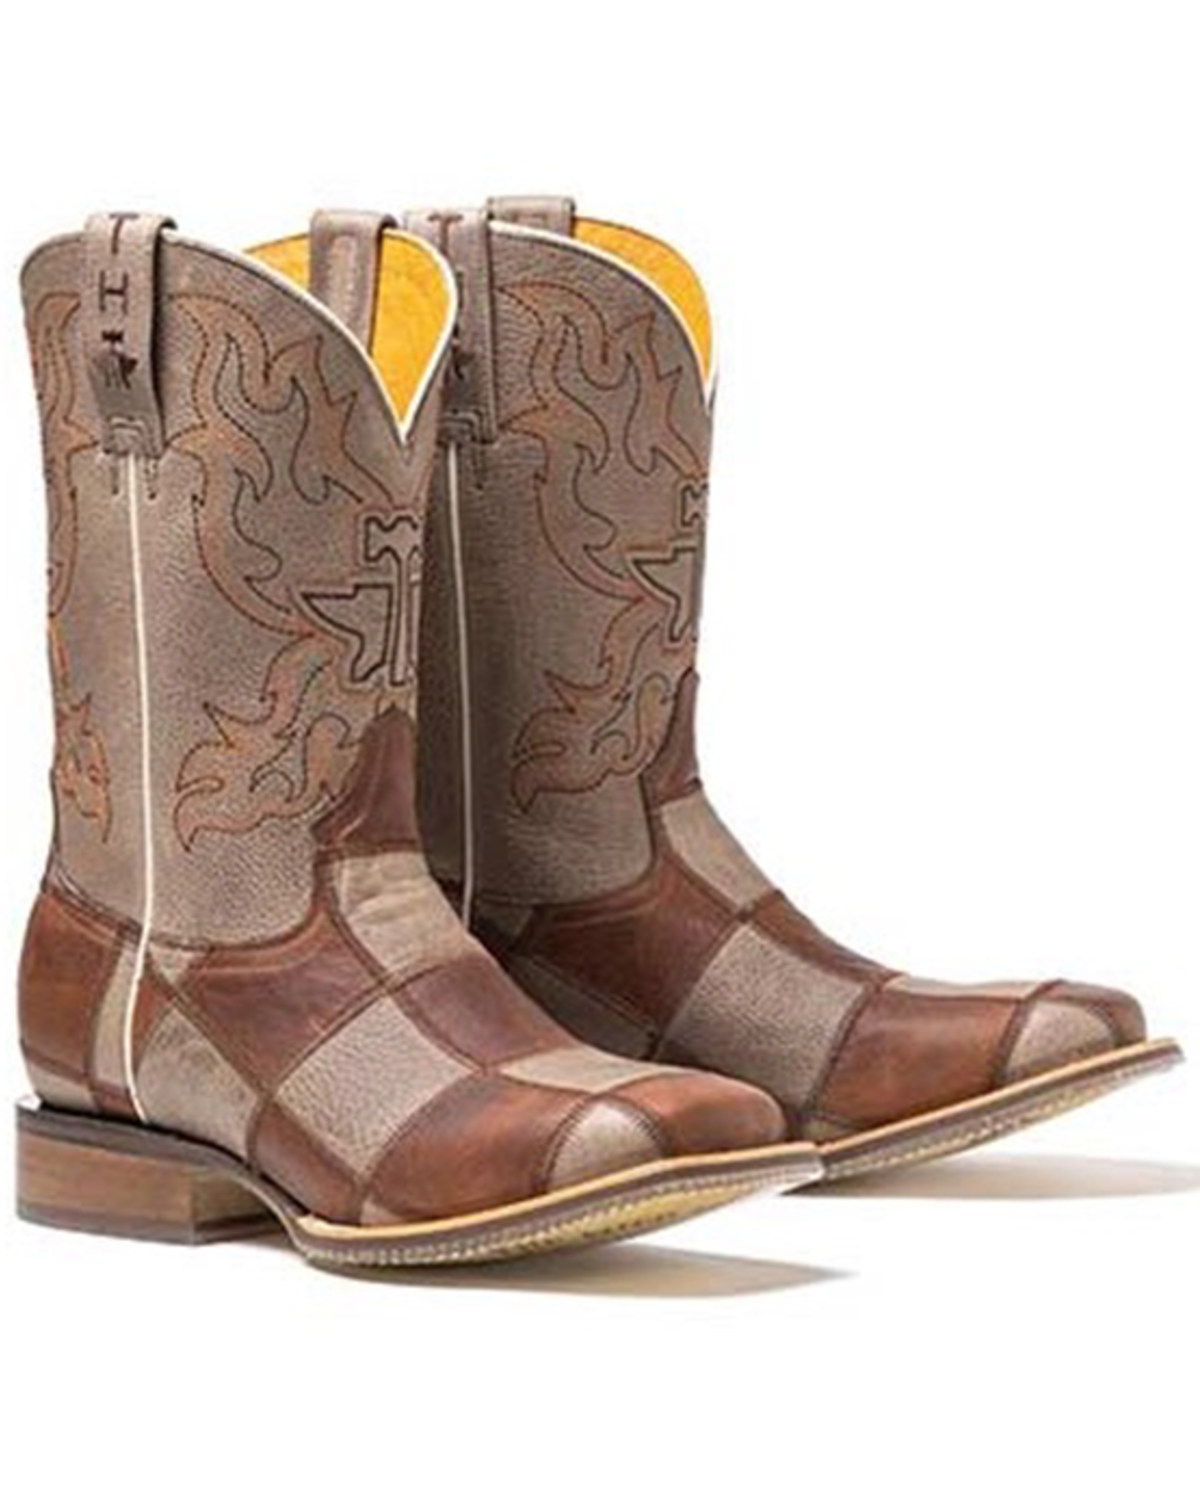 Tin Haul Men's Checkers Western Boots - Broad Square Toe